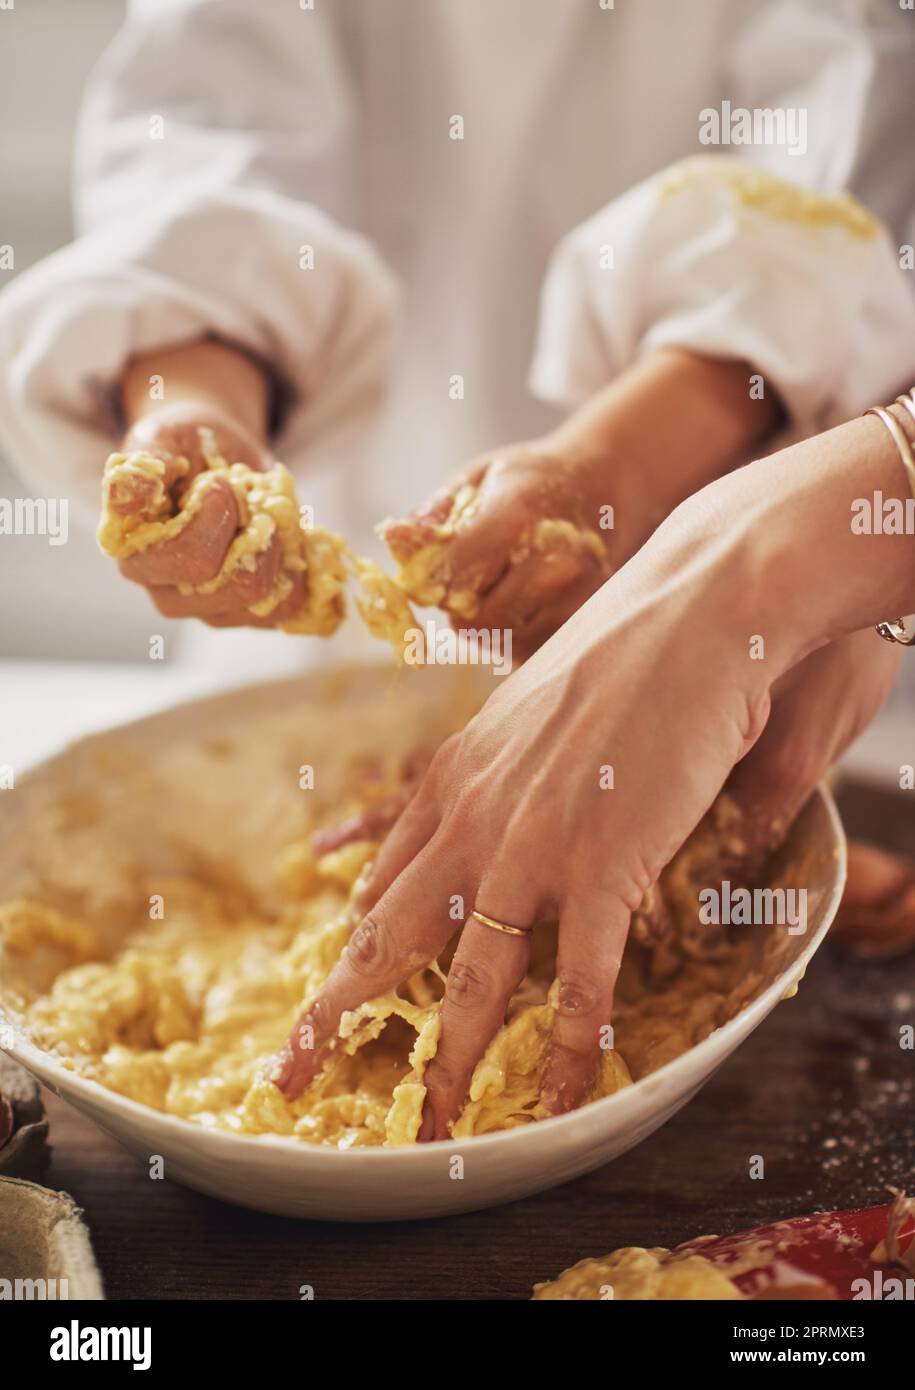 Its messy but fun. a mother and her son baking in the kitchen. Stock Photo